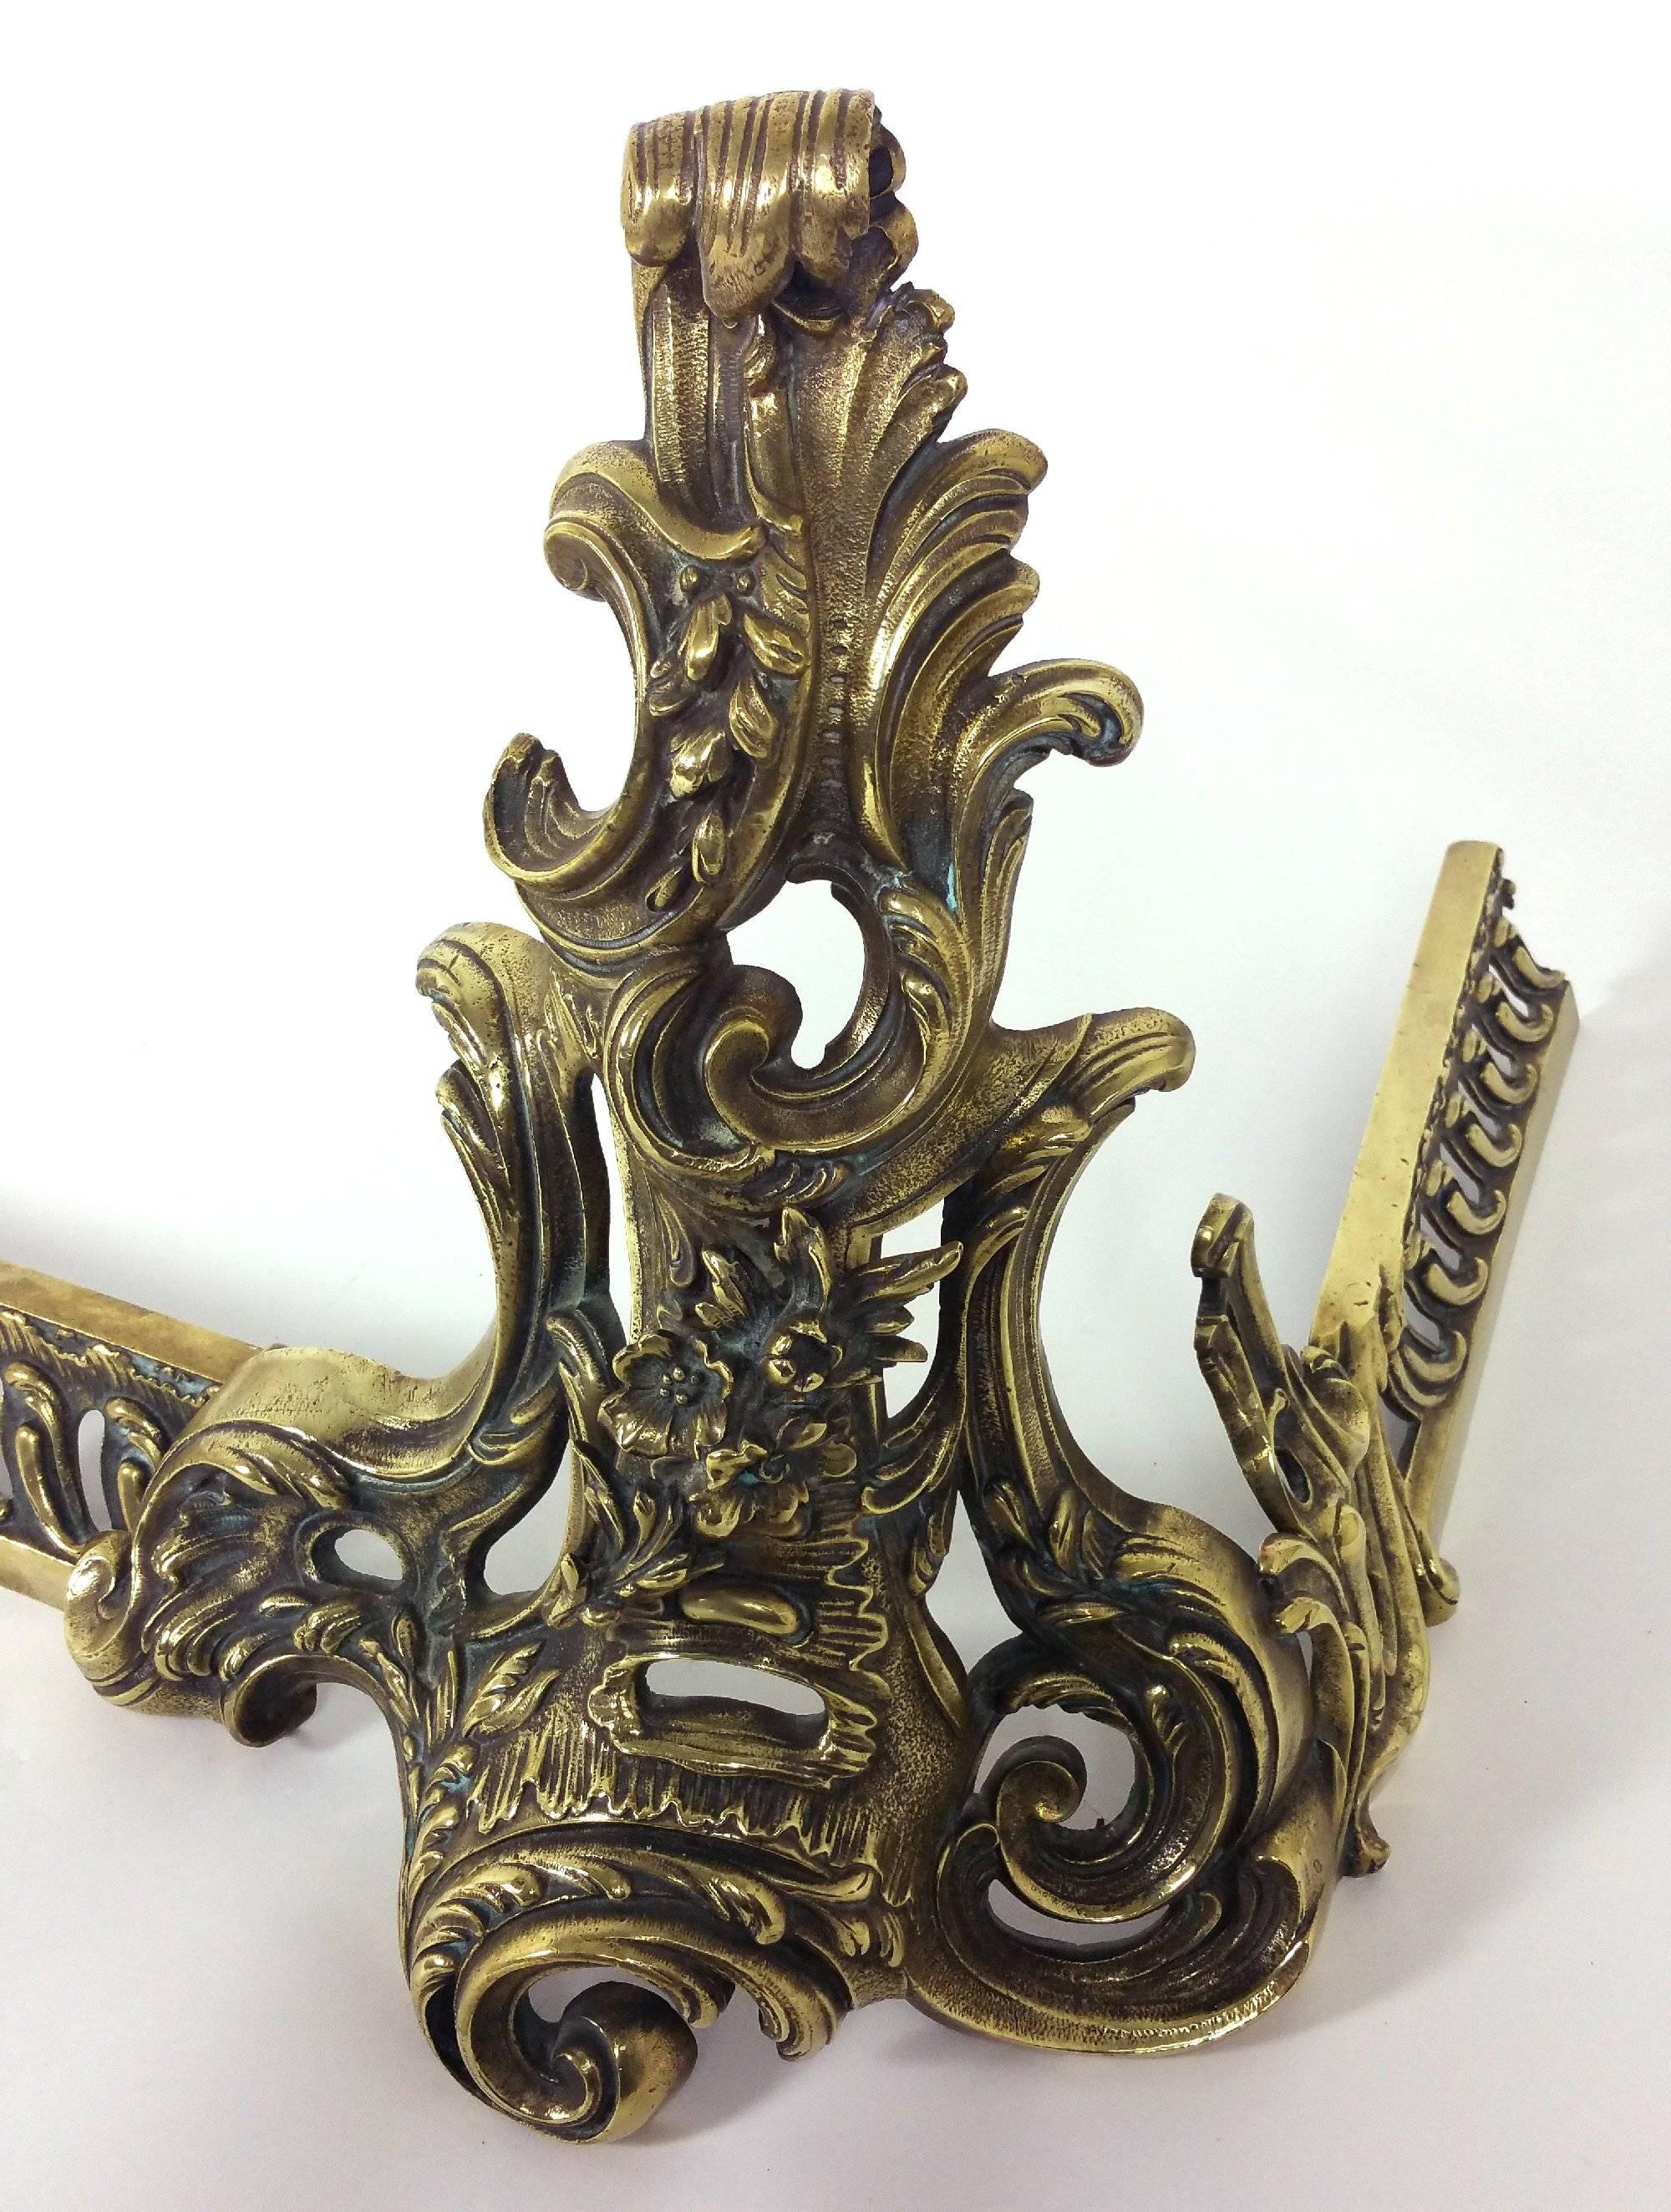 This attractive and very stylish 19th century French gilt brass rococo adjustable fire fender features a pierced decoration with a lovely curled and swirled design. The fender fully extended measures 67 in – 170.2 cm wide, 18 in – 45.7 cm deep and